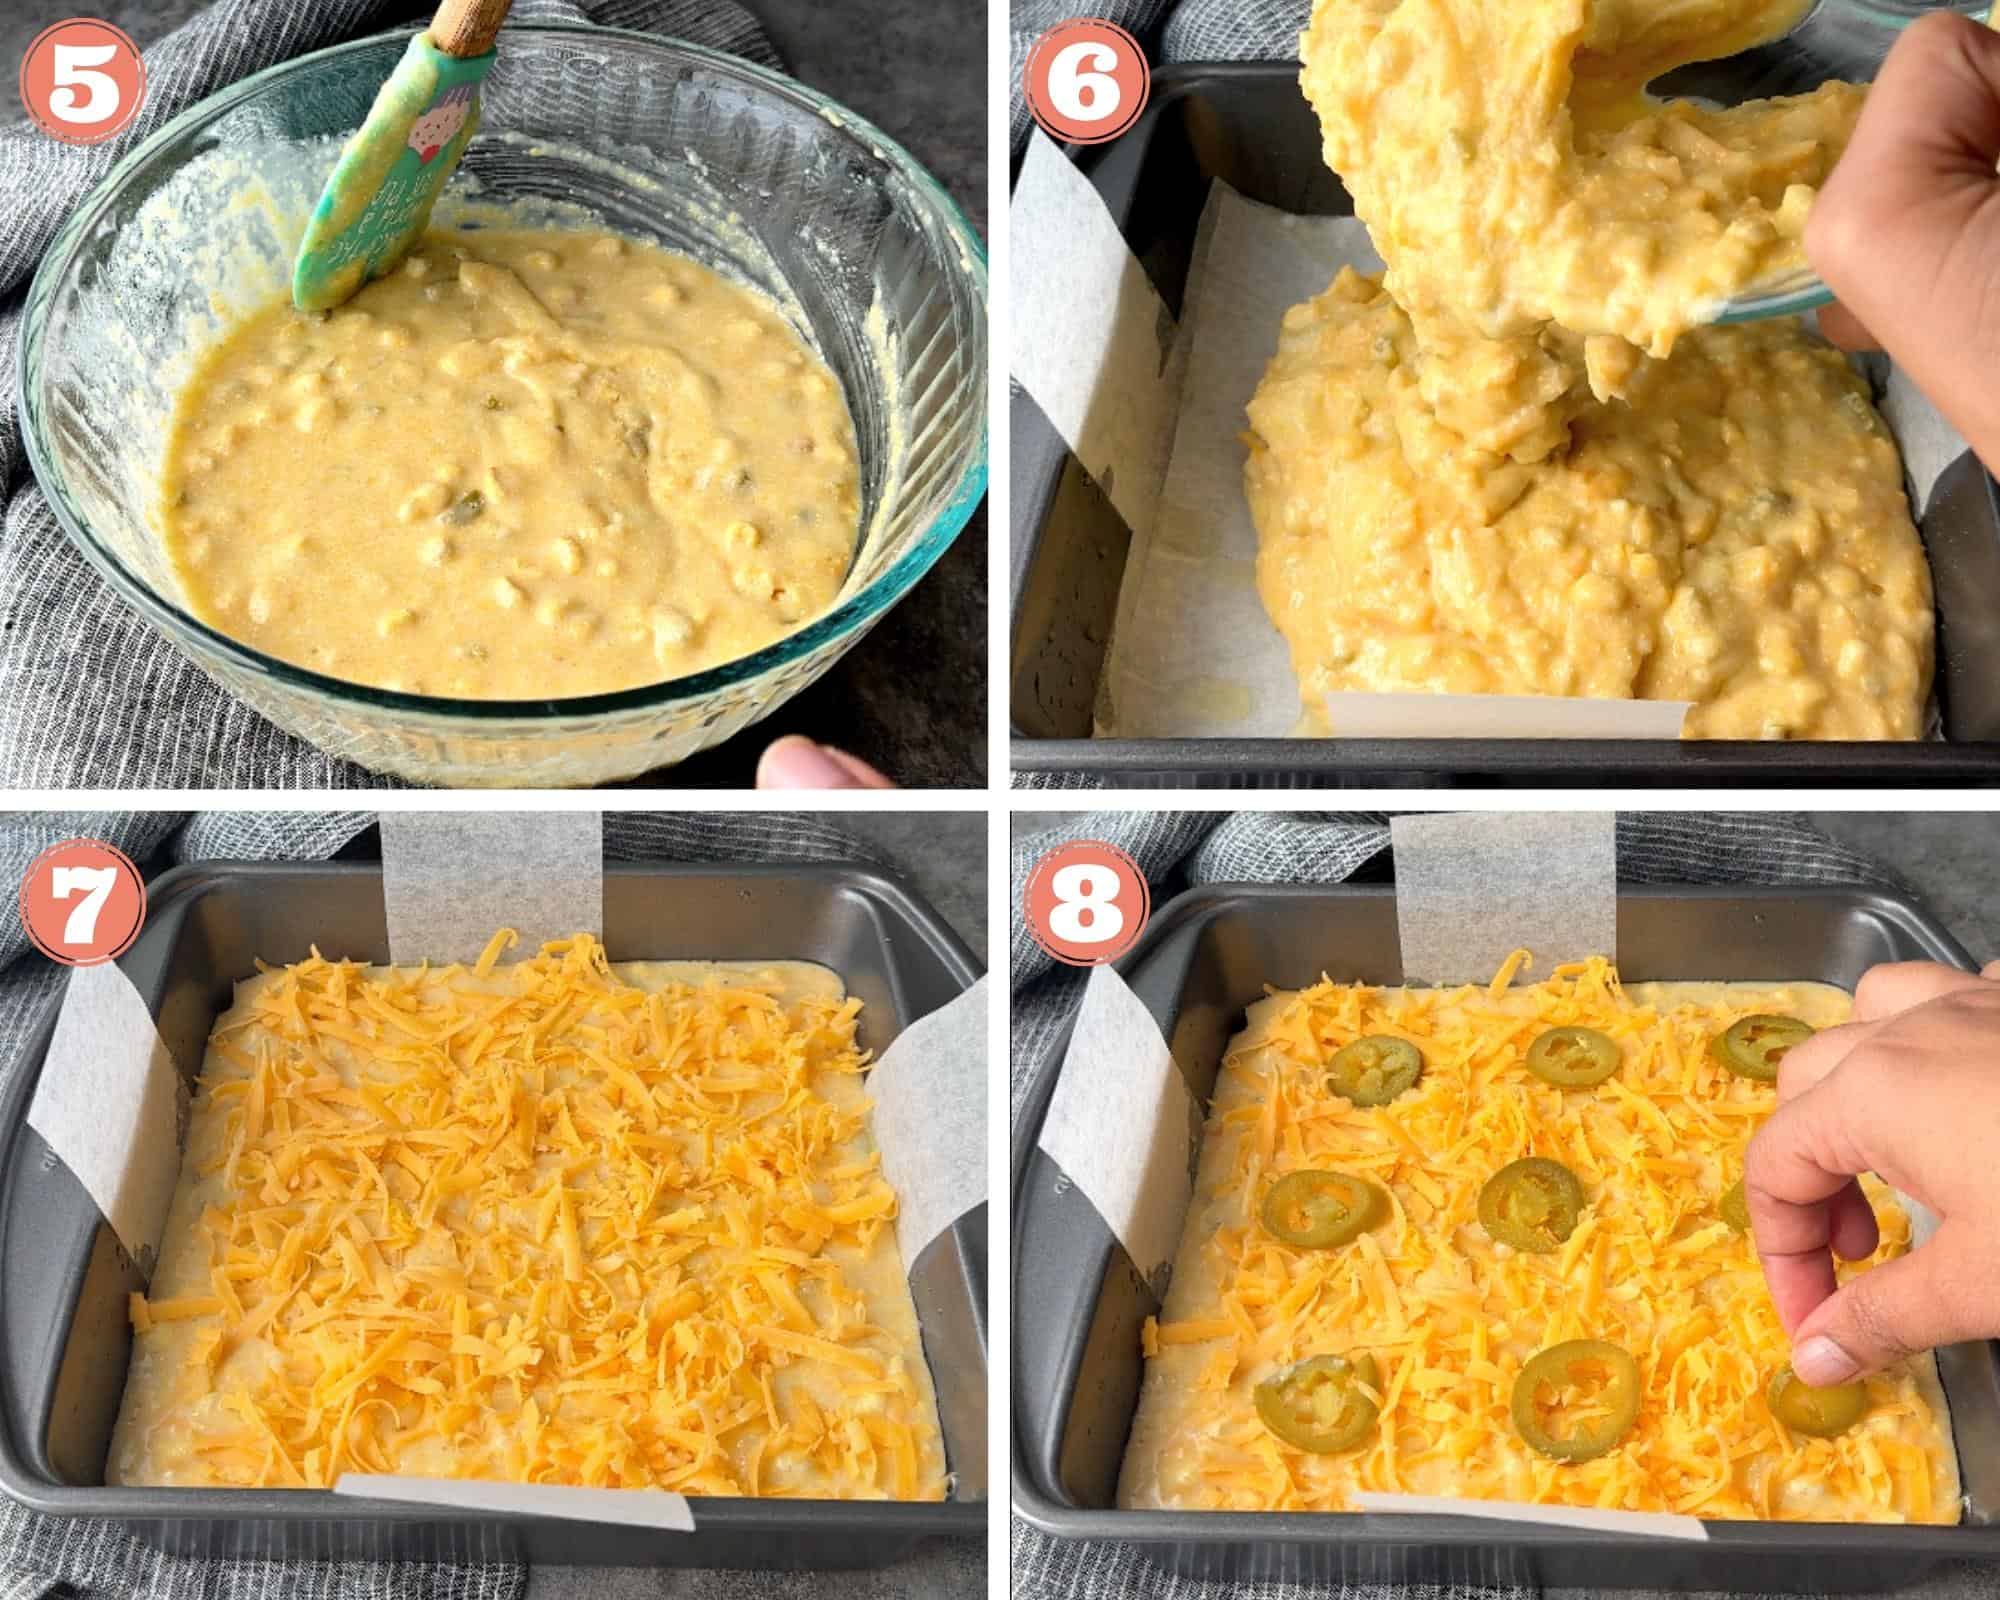 4-steps showing topping batter with cheese and jalapeno in baking pan